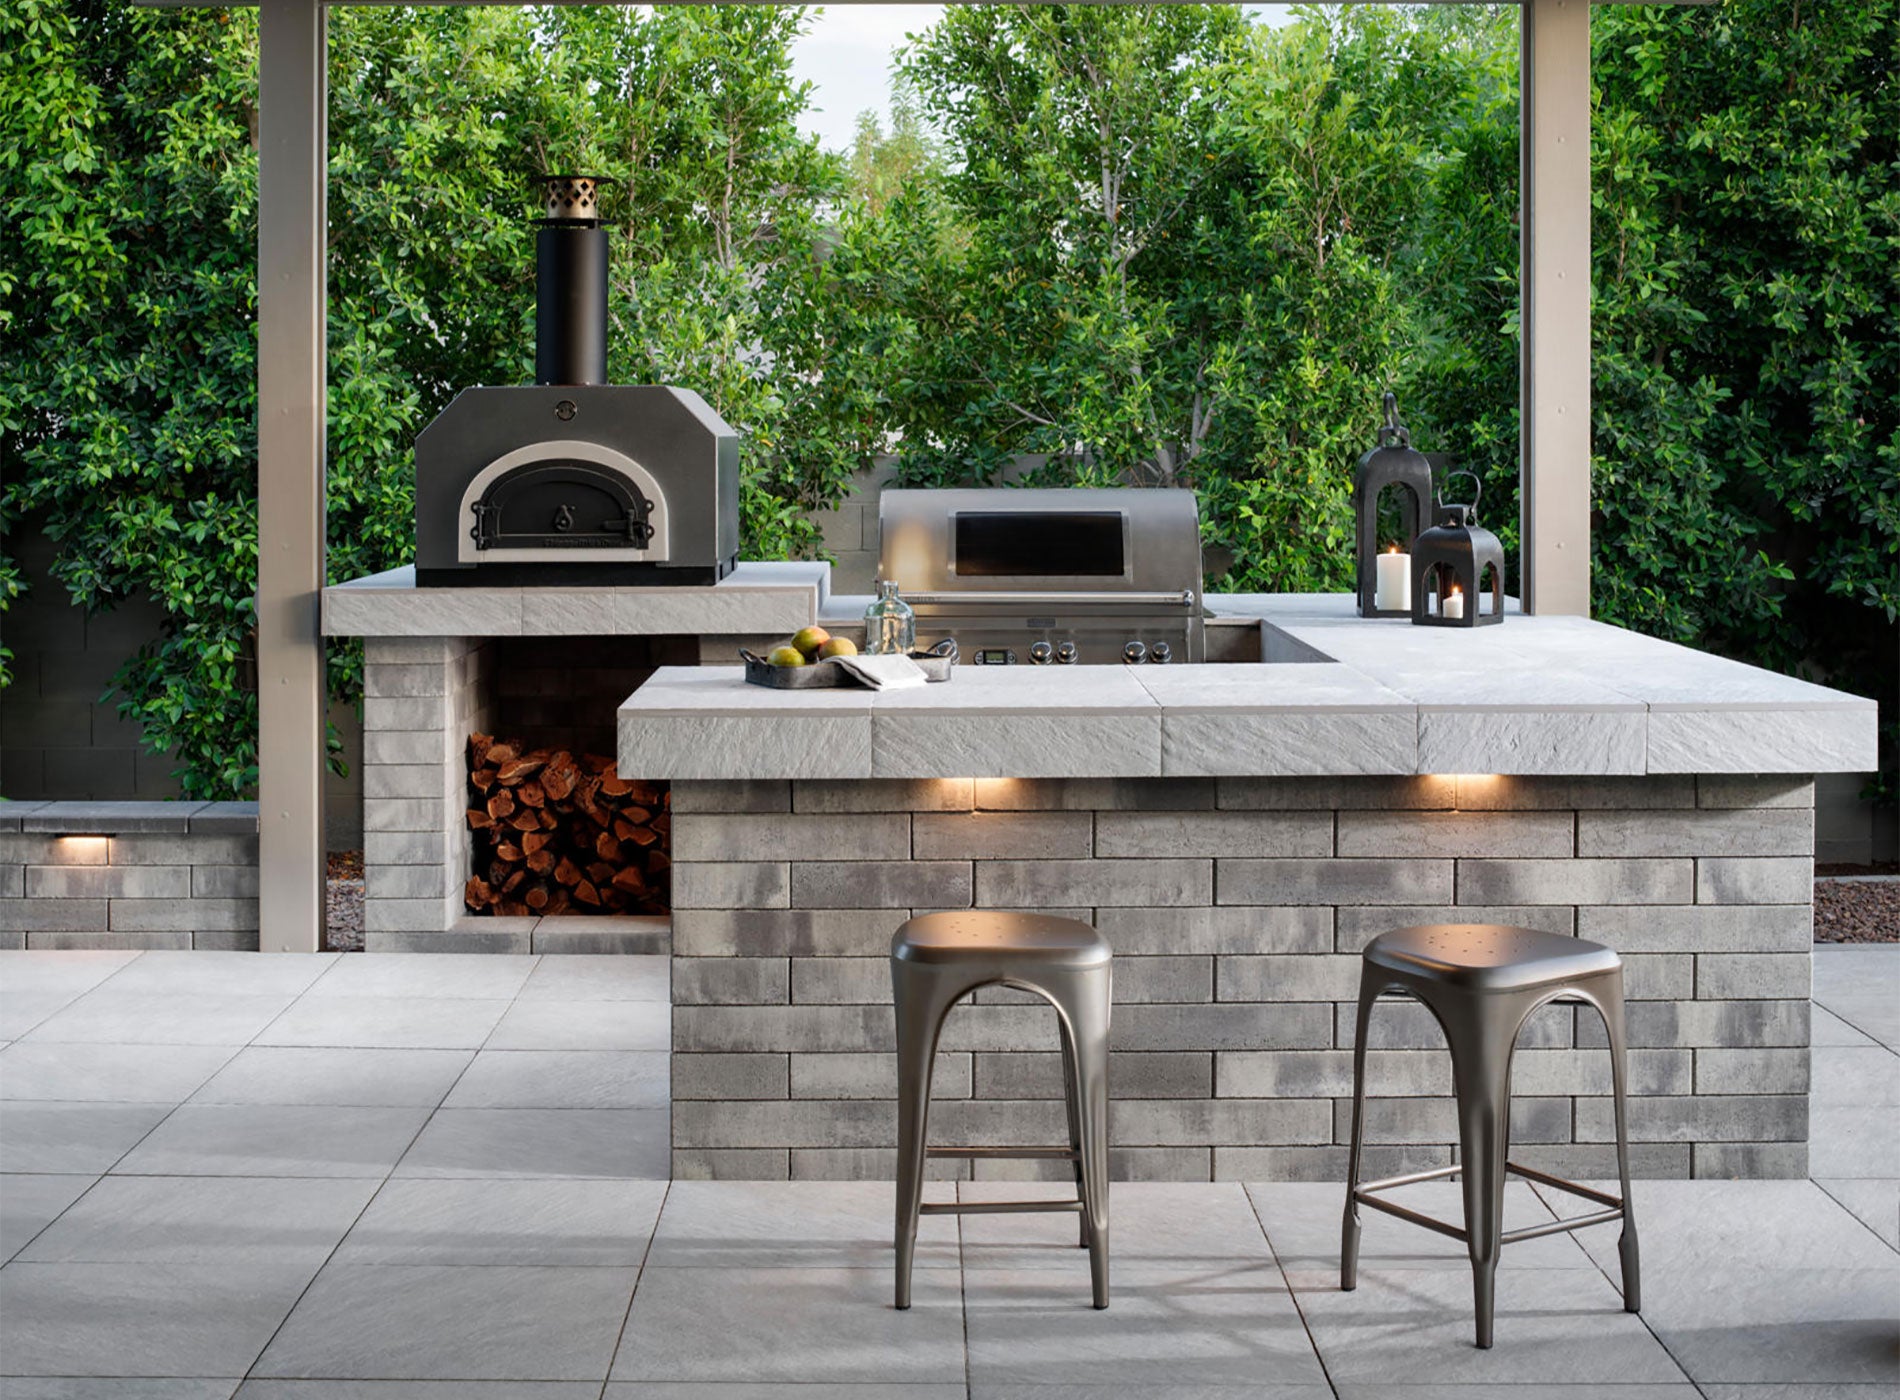 An outdoor kitchen with a pizza oven and bar counter